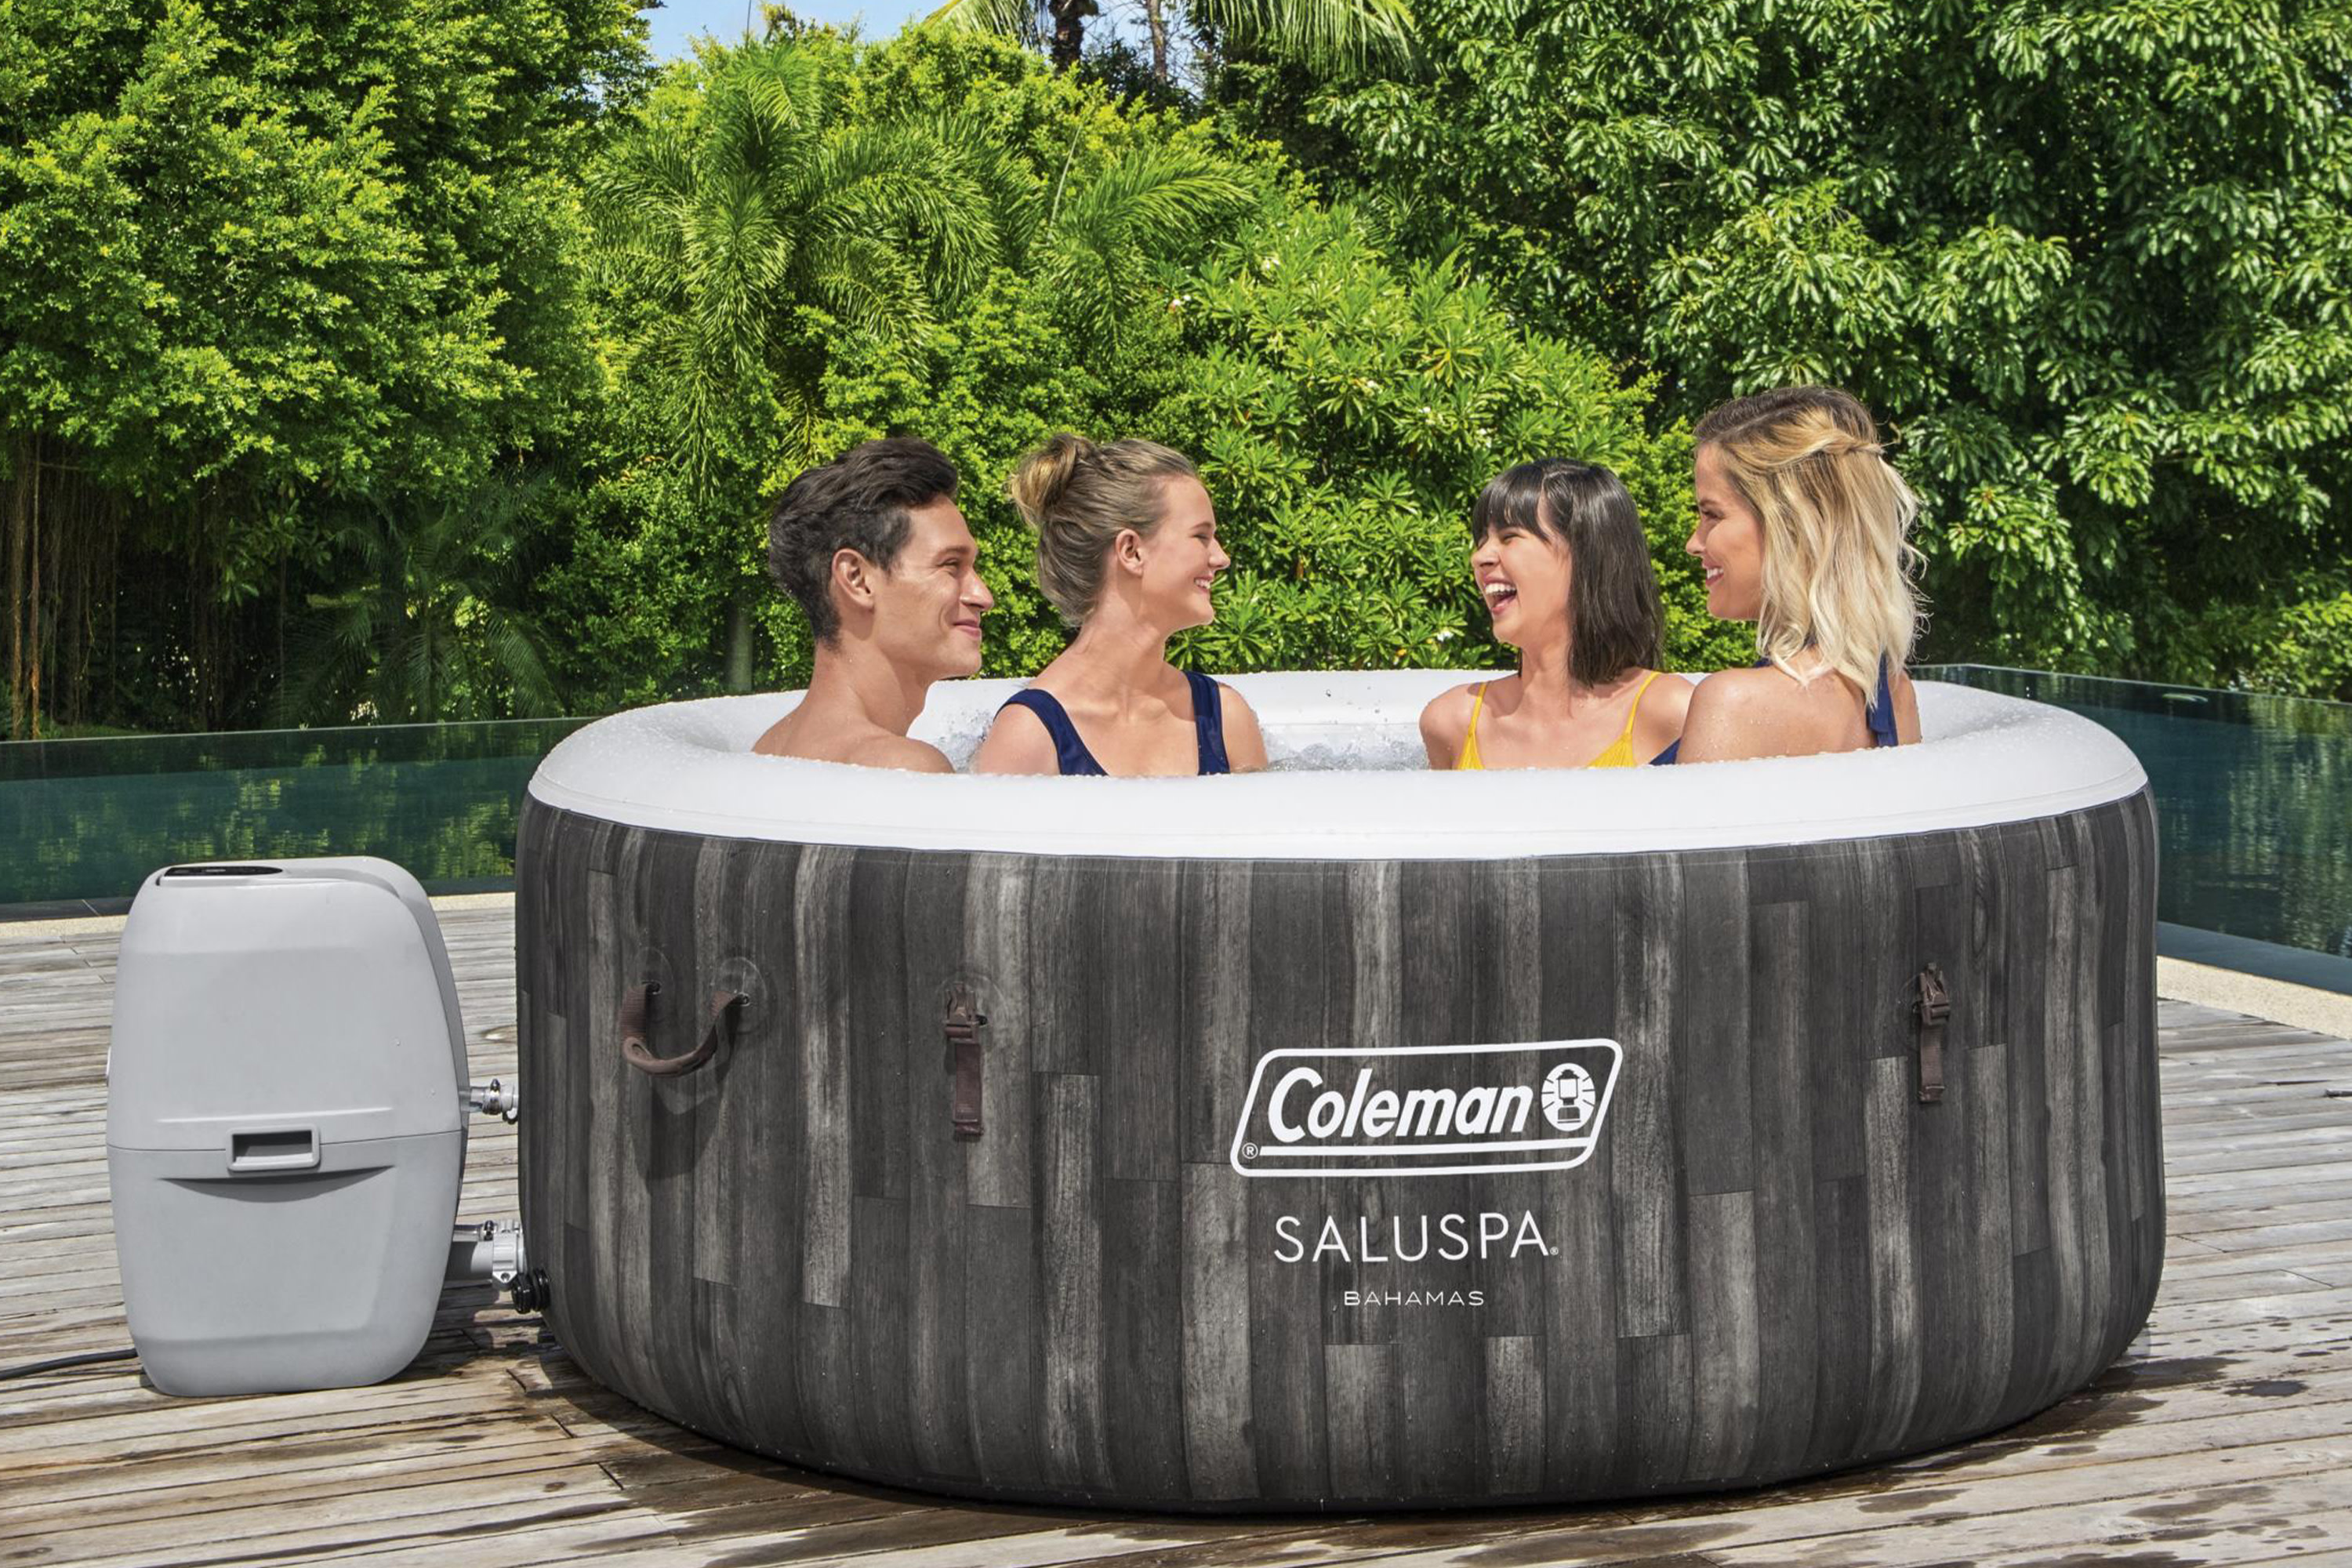 Coleman 71" x 26" Bahamas AirJet Spa Outdoor 177 gal. Spring Inflatable Hot Tub, 104˚F - image 4 of 10